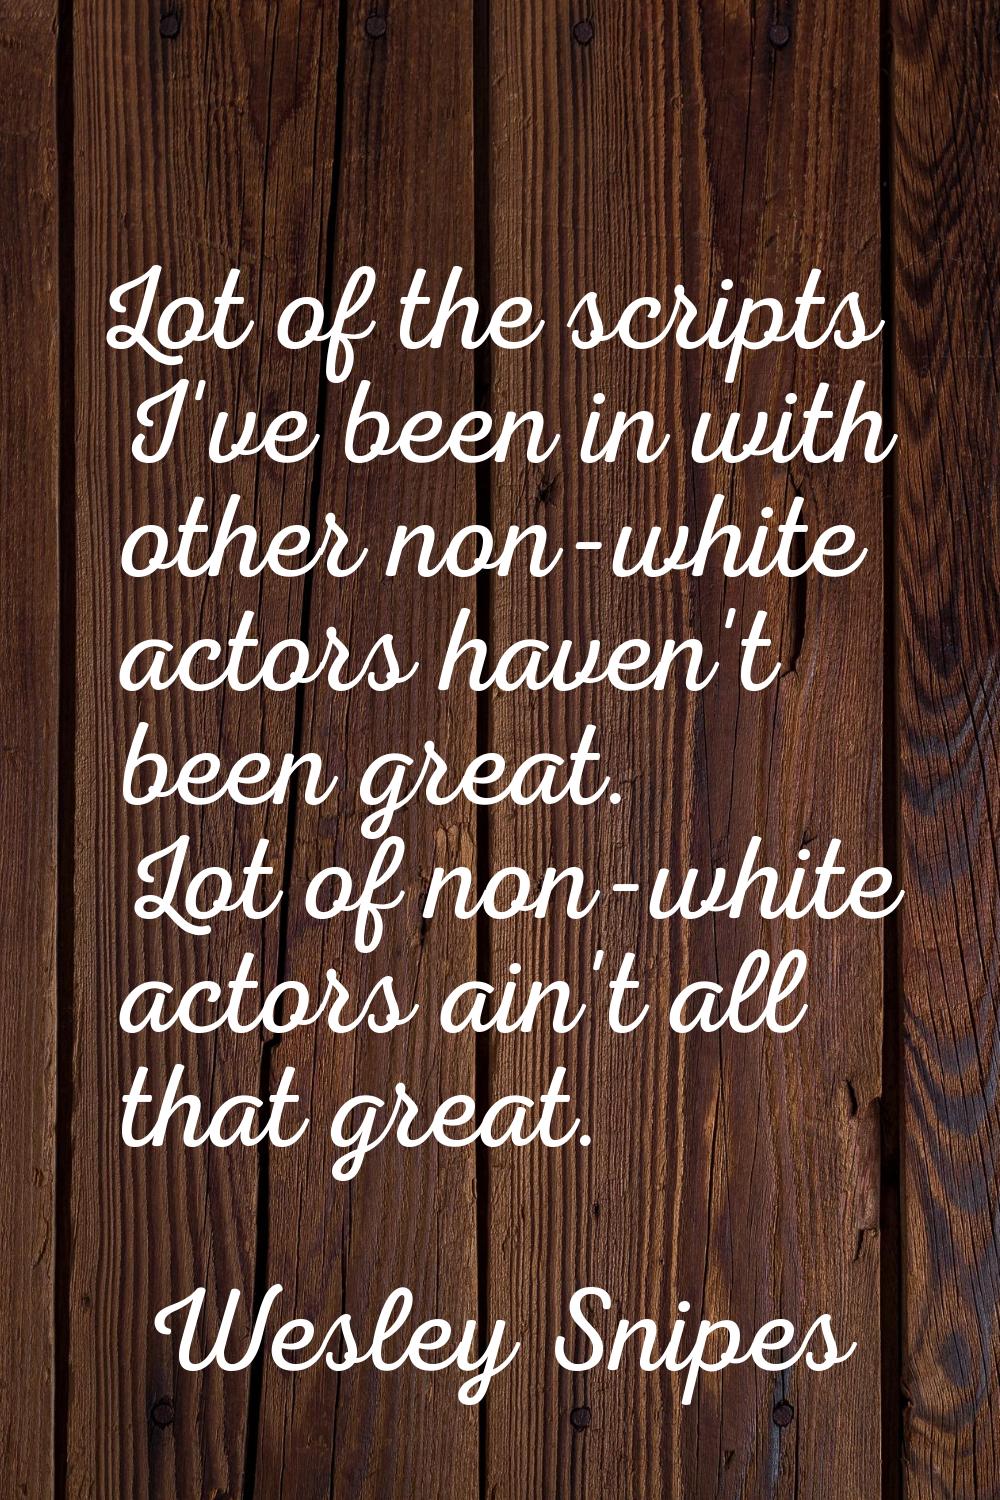 Lot of the scripts I've been in with other non-white actors haven't been great. Lot of non-white ac